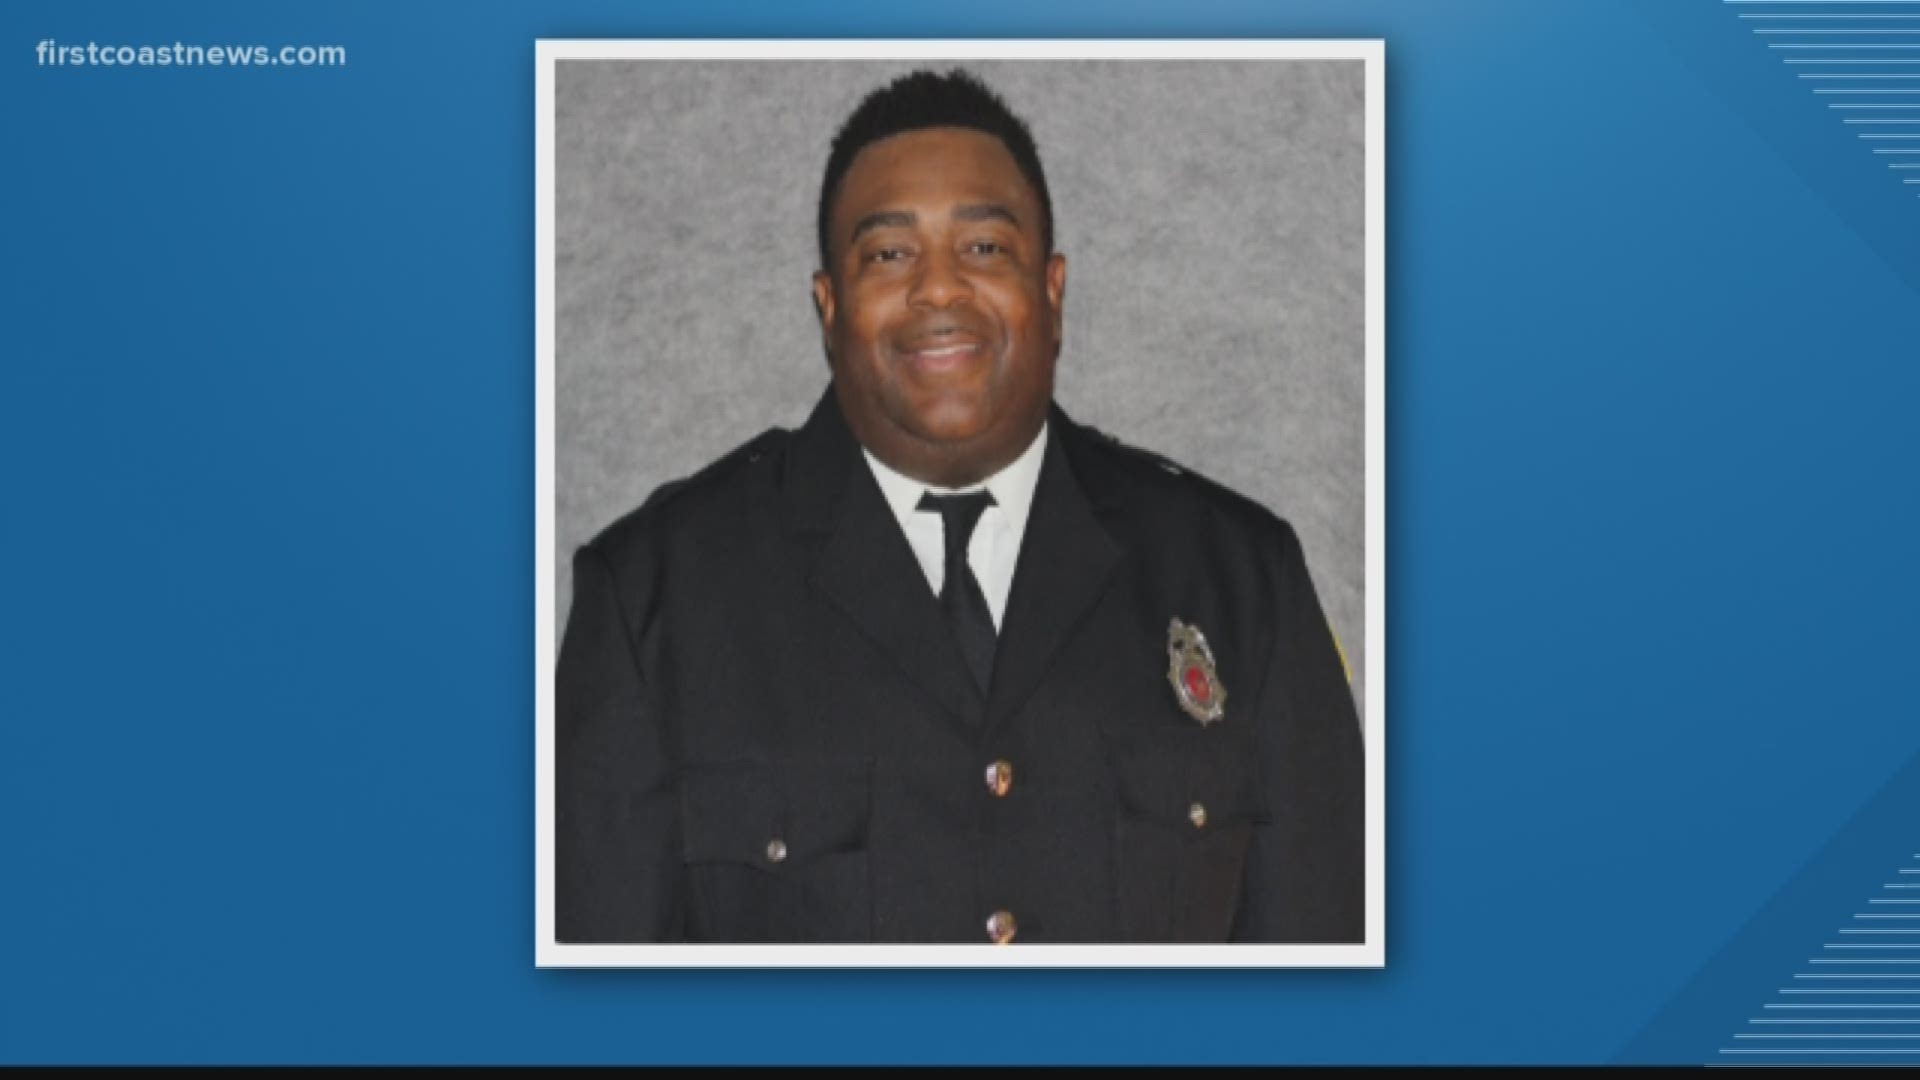 Vincent Harper was recognized as Firefighter of the Year Friday after his heroic efforts saved the life of his coworker during a stabbing attack in October of 2019.